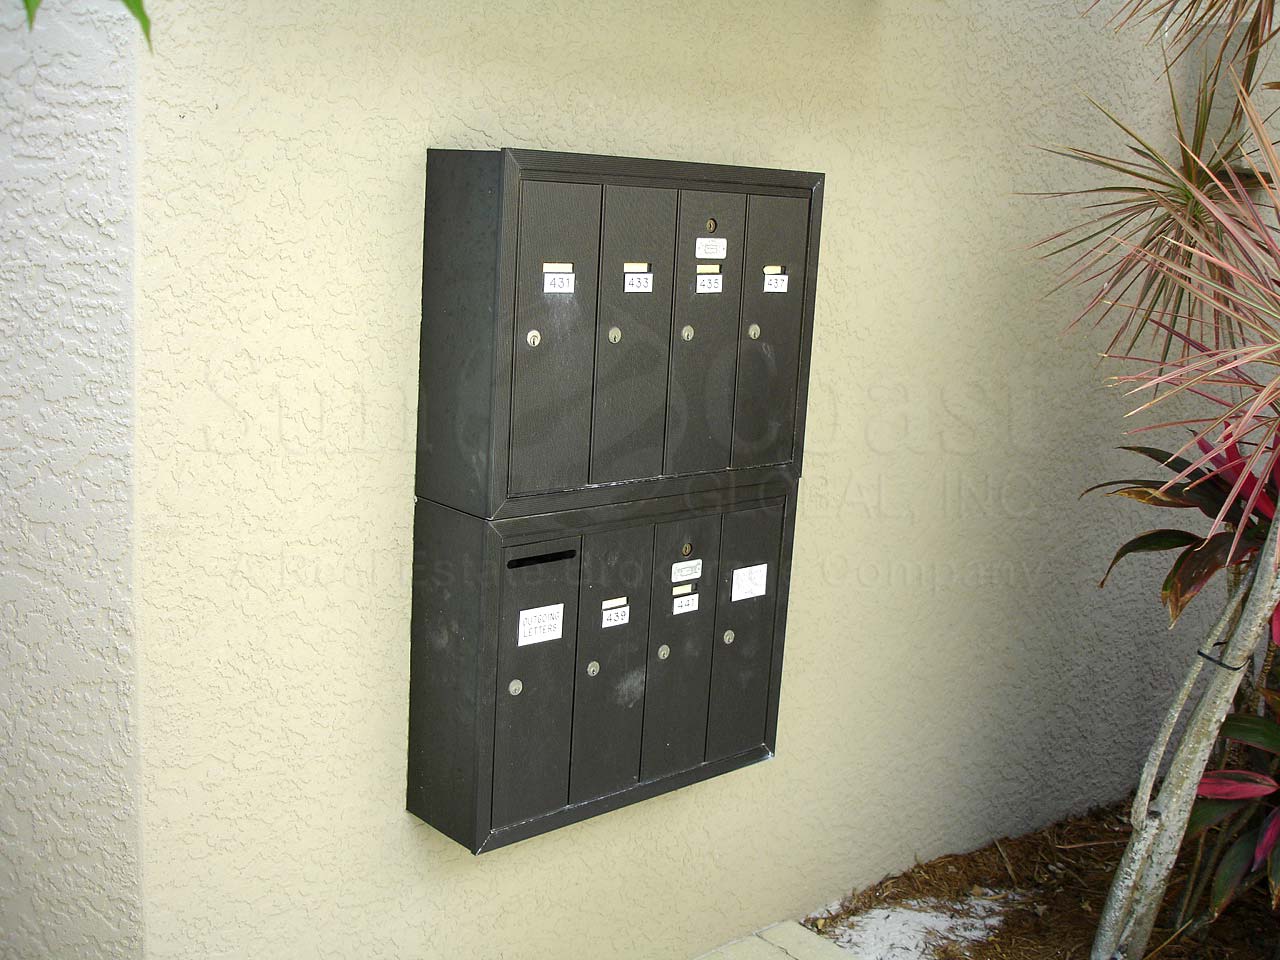 Benchmark Mailboxes